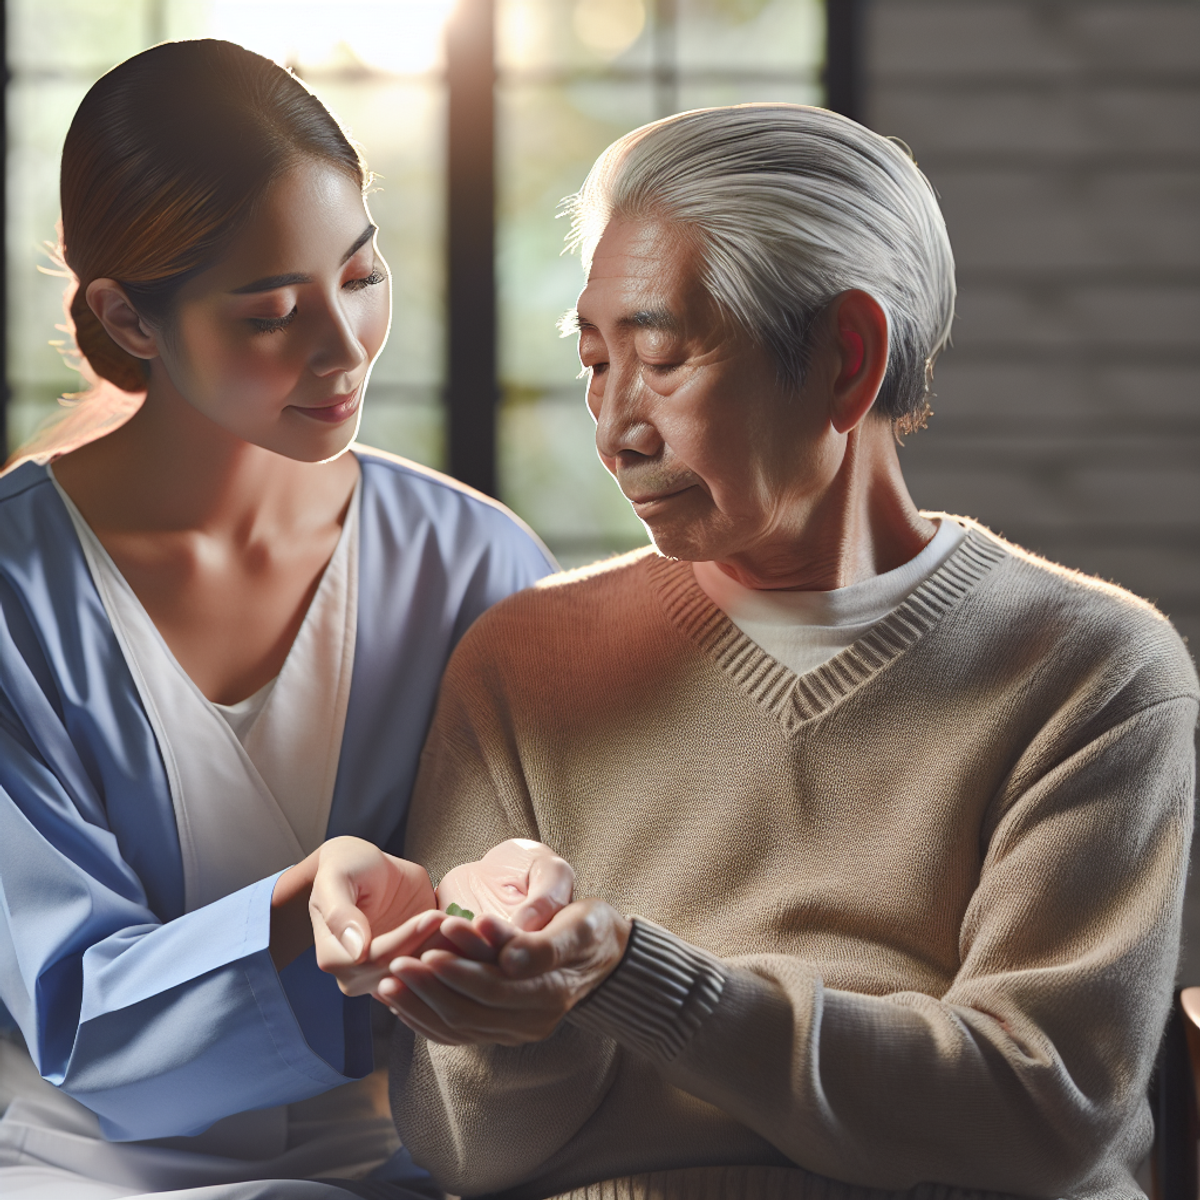 A female caregiver of Middle-Eastern descent gently holds the hands of an elderly Asian man, capturing a moment of compassionate connection in a peace